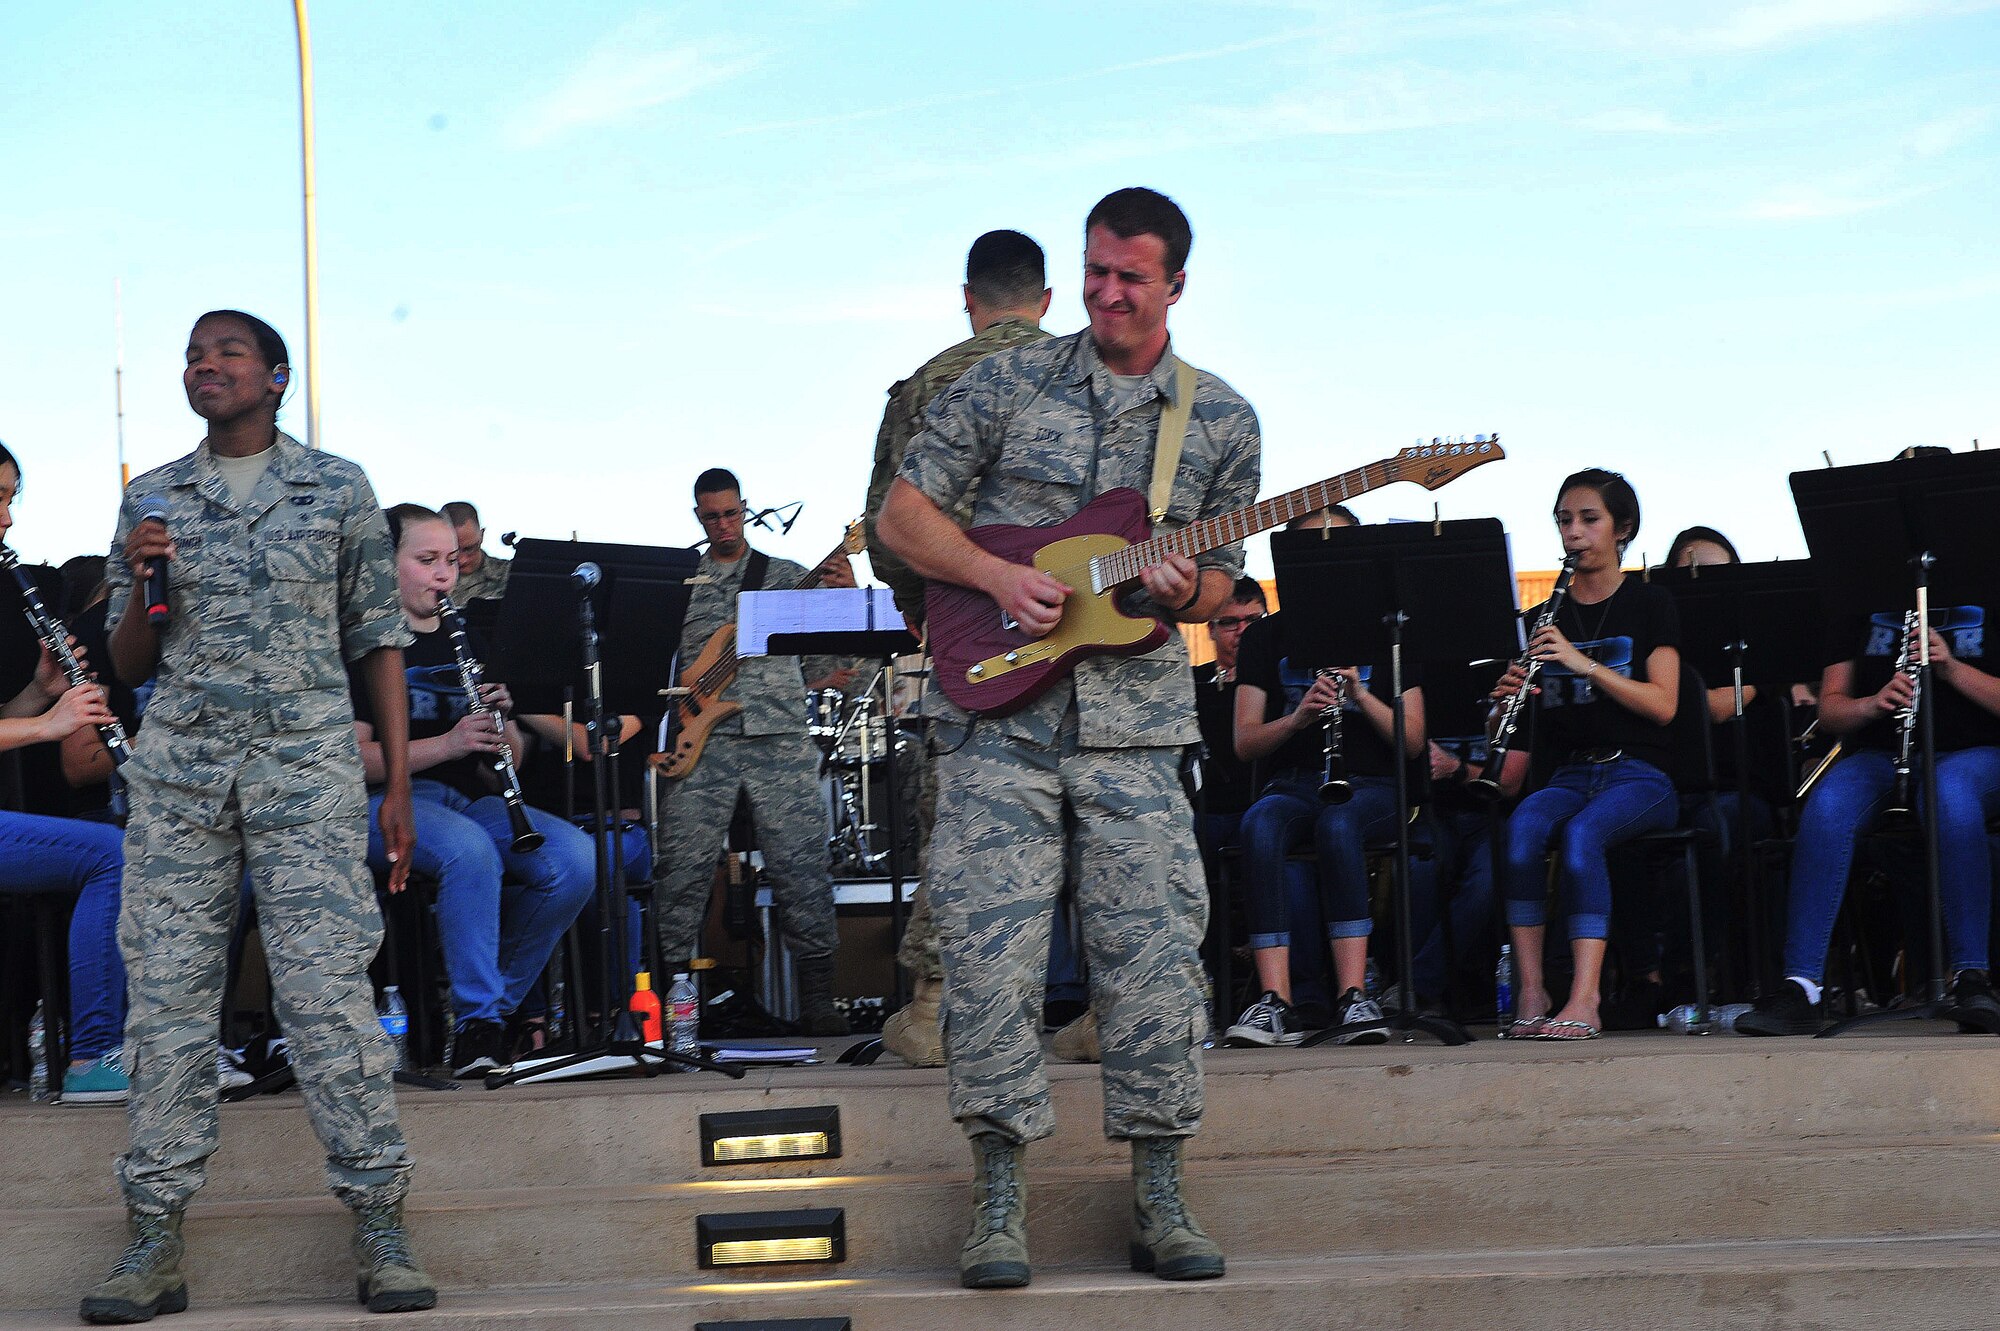 U.S. Air Force Band of the Golden West